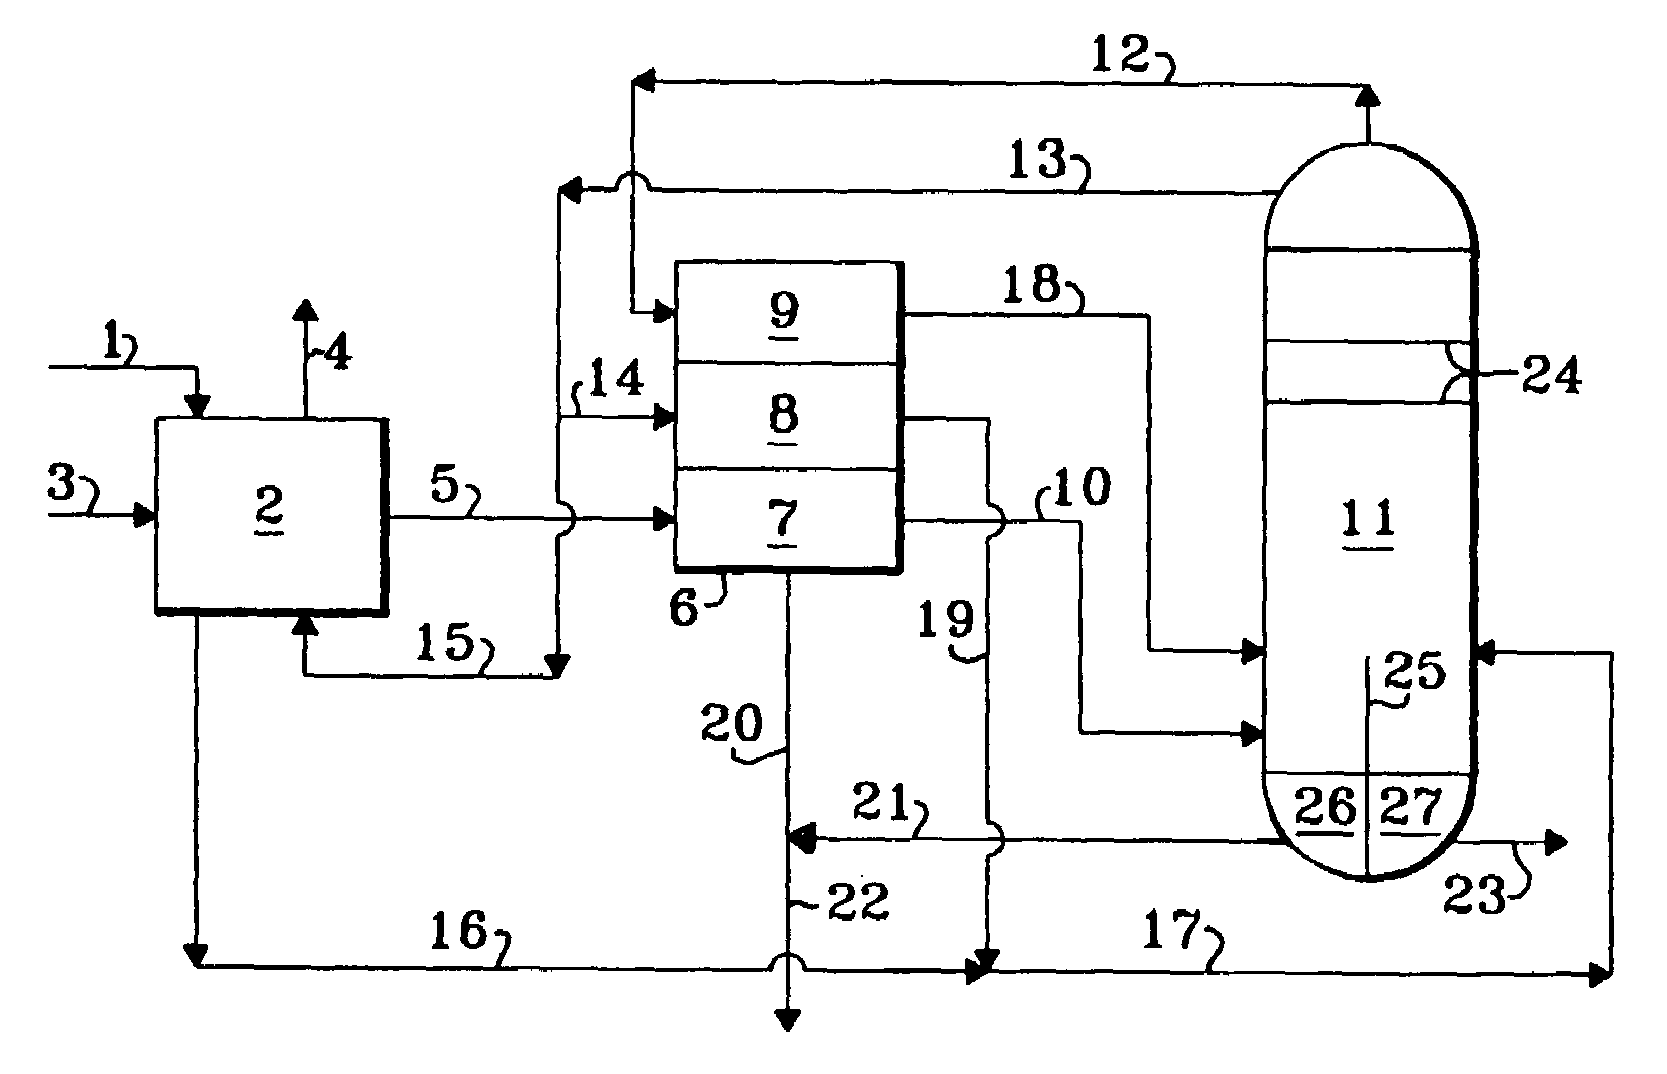 Process for the regeneration of an adsorbent bed containing sulfur oxidated compounds